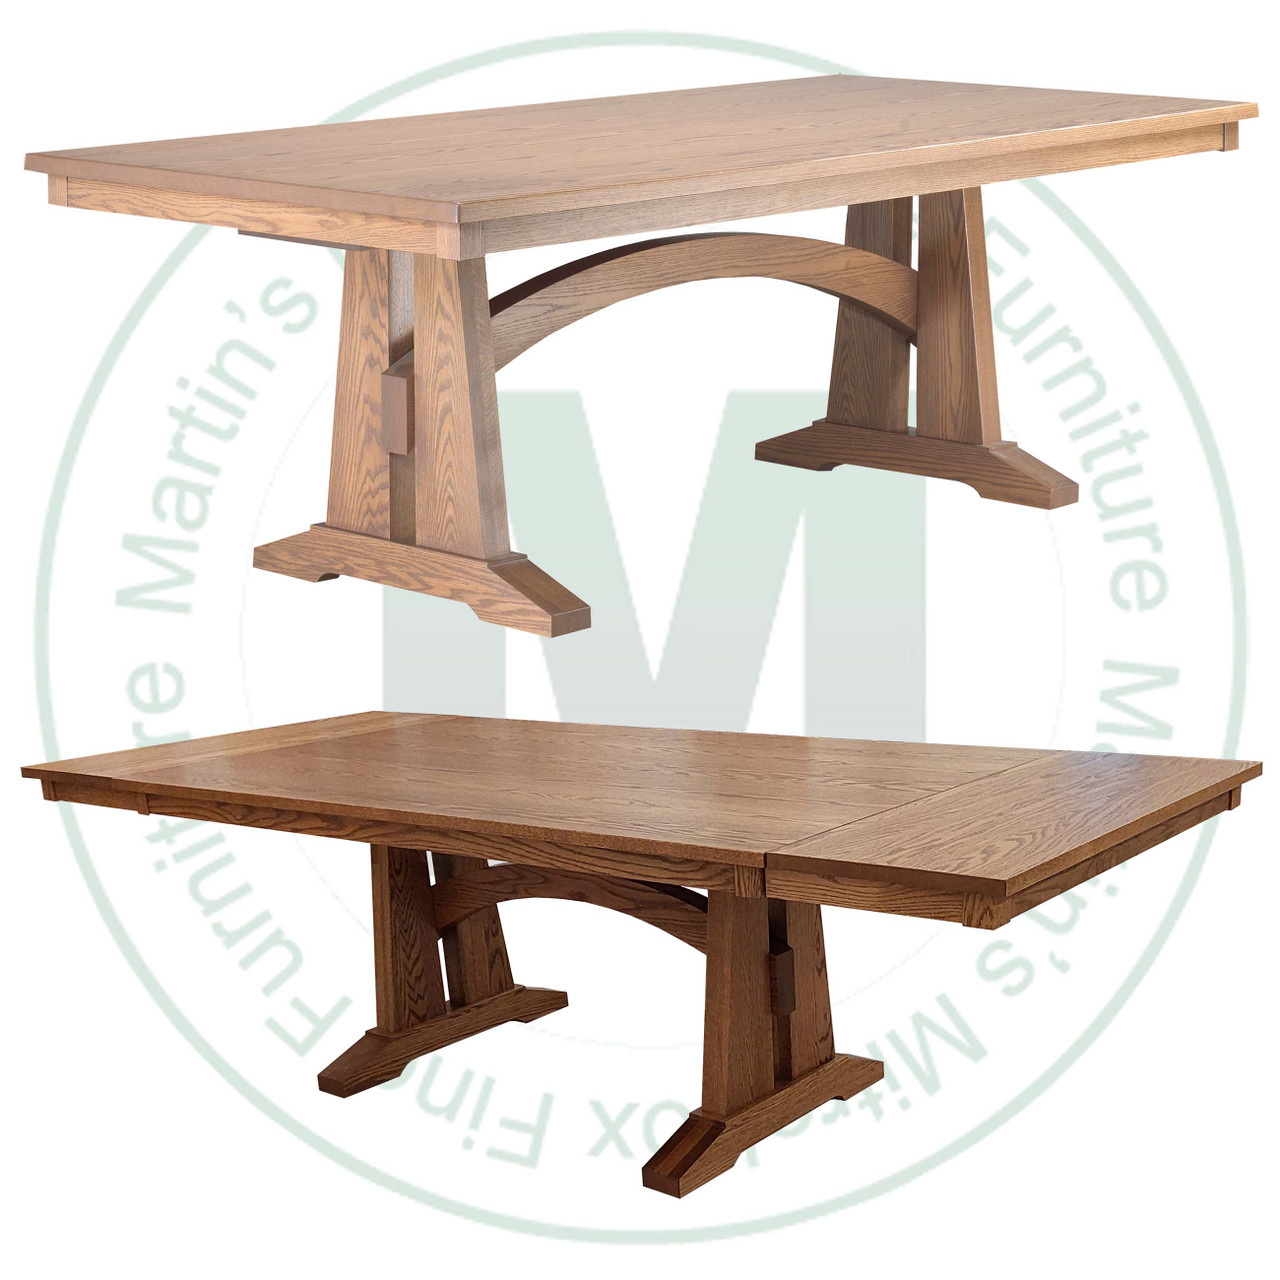 Maple Golden Gate Solid Top Pedestal Table 48''D x 72''W x 30''H And 2 - 16'' Extensions. Table Has 1.25'' Thick Top